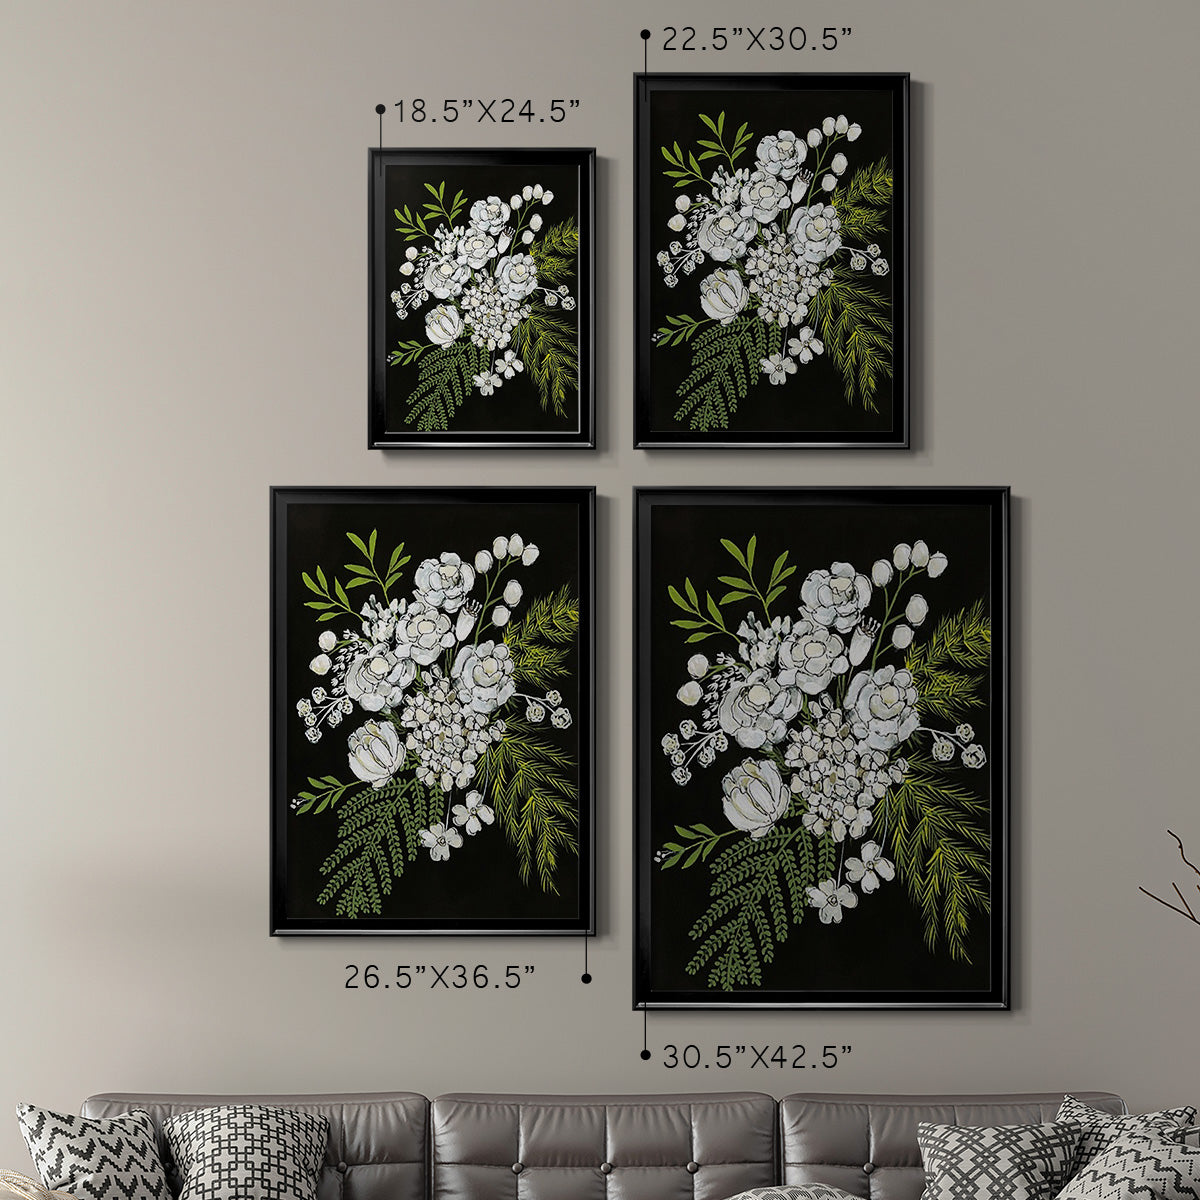 Alabaster Bouquet I Premium Framed Print - Ready to Hang